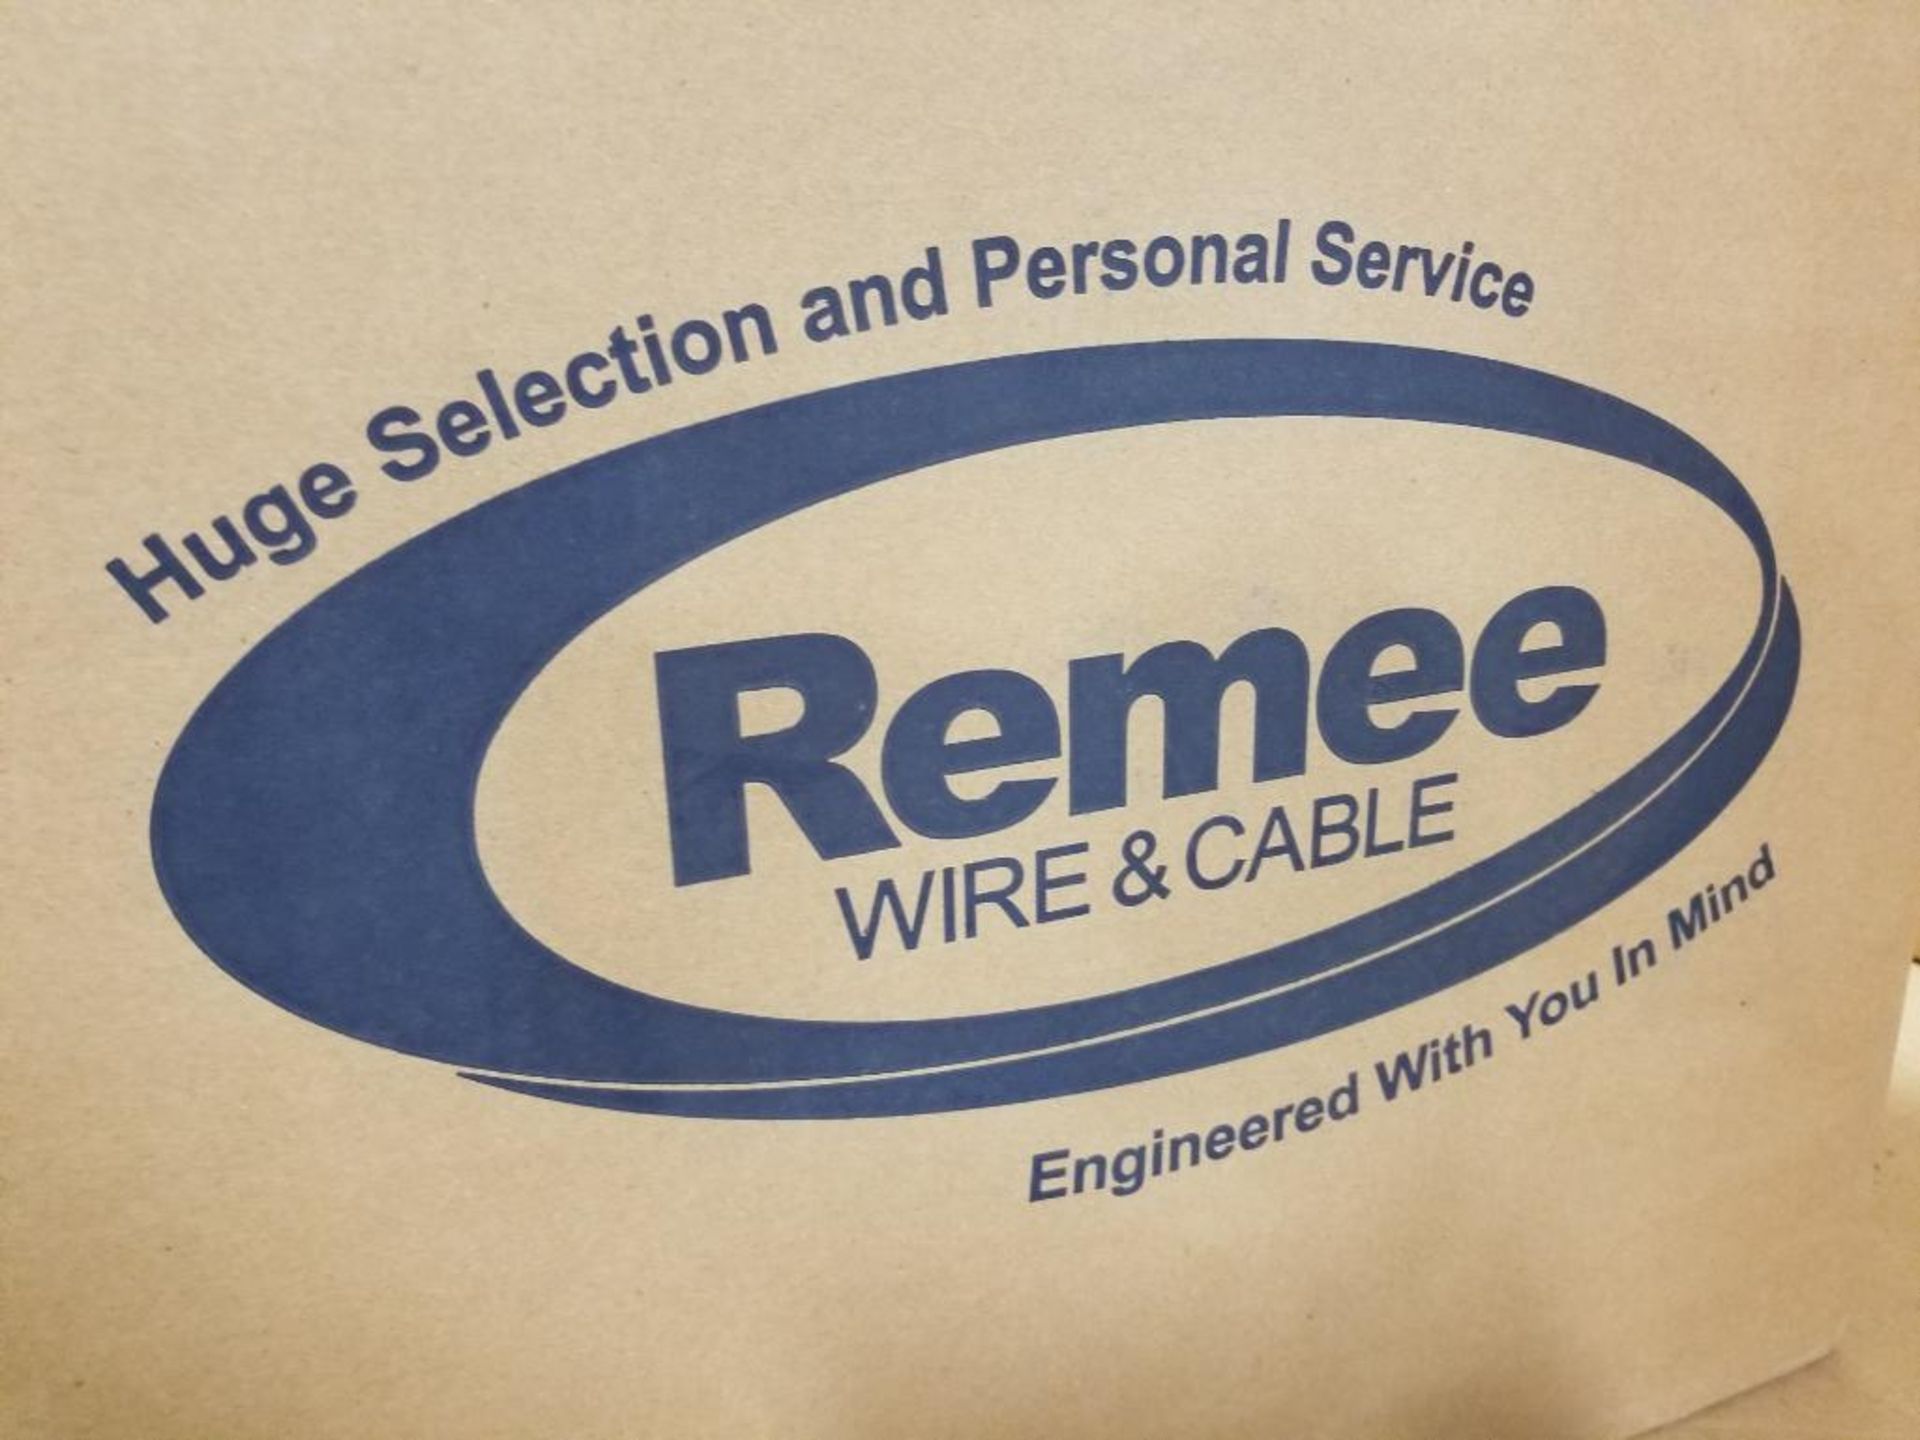 Qty 2 - Remee R001563WRM20 wire and cable. RG6/U 18AWG CCS 3.0 GHz CMR/CATVR FT4. 1000ft per box.